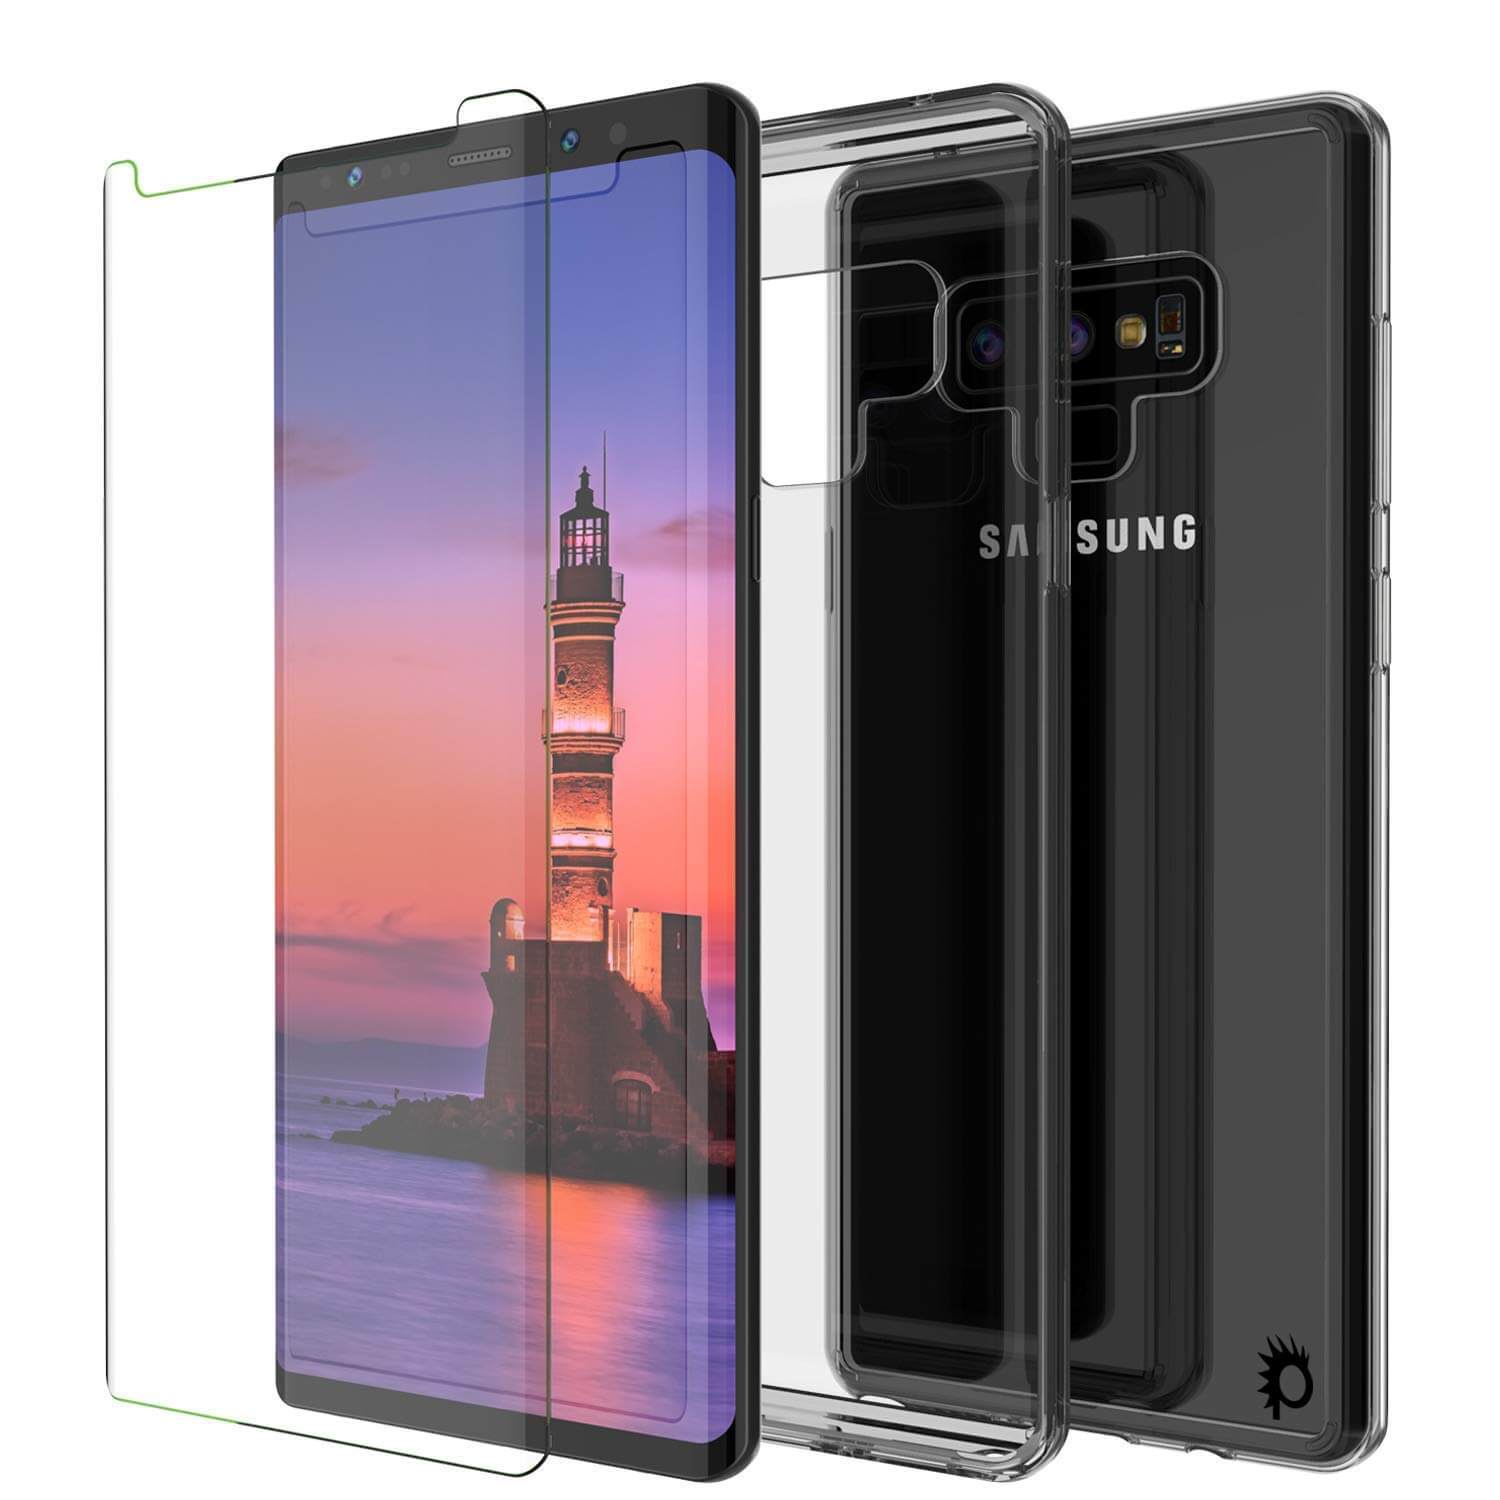 Galaxy Note 9 Case, PUNKcase [LUCID 2.0 Series] [Slim Fit] Armor Cover W/Integrated Anti-Shock System [Crystal Black]